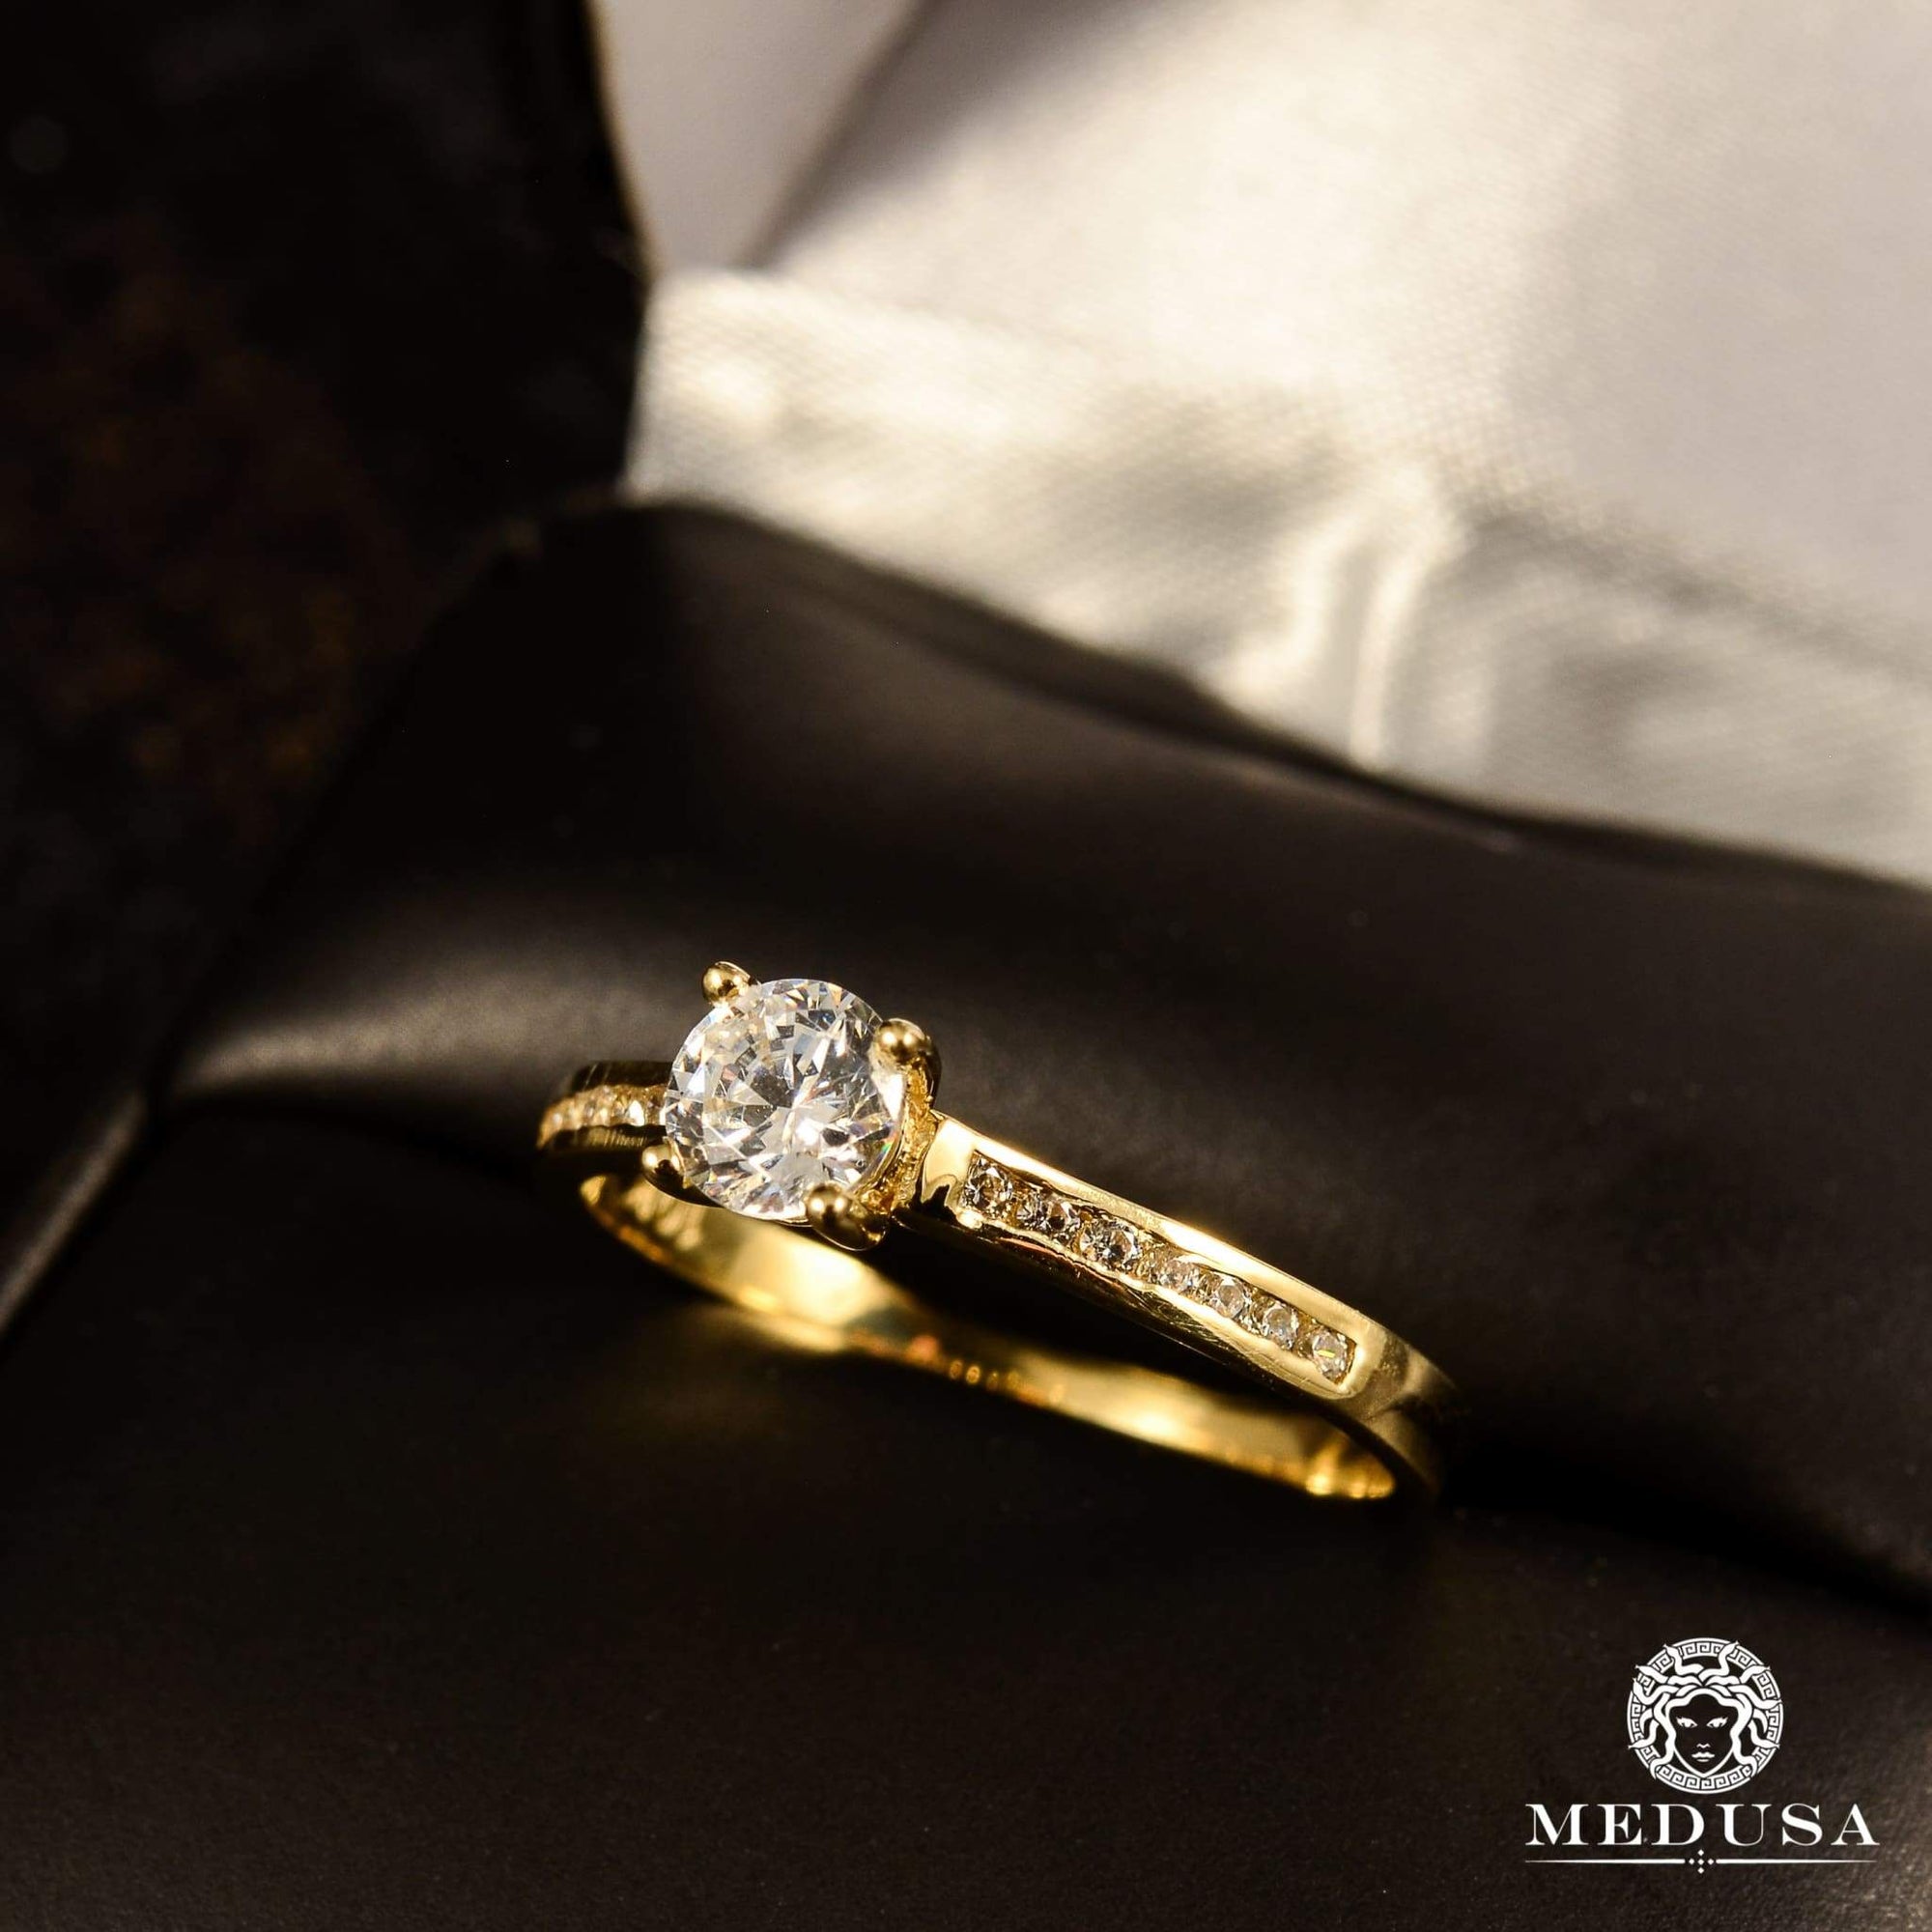 14K Gold Diamond Ring | F8 Solitaire Engagement Ring - MA0737